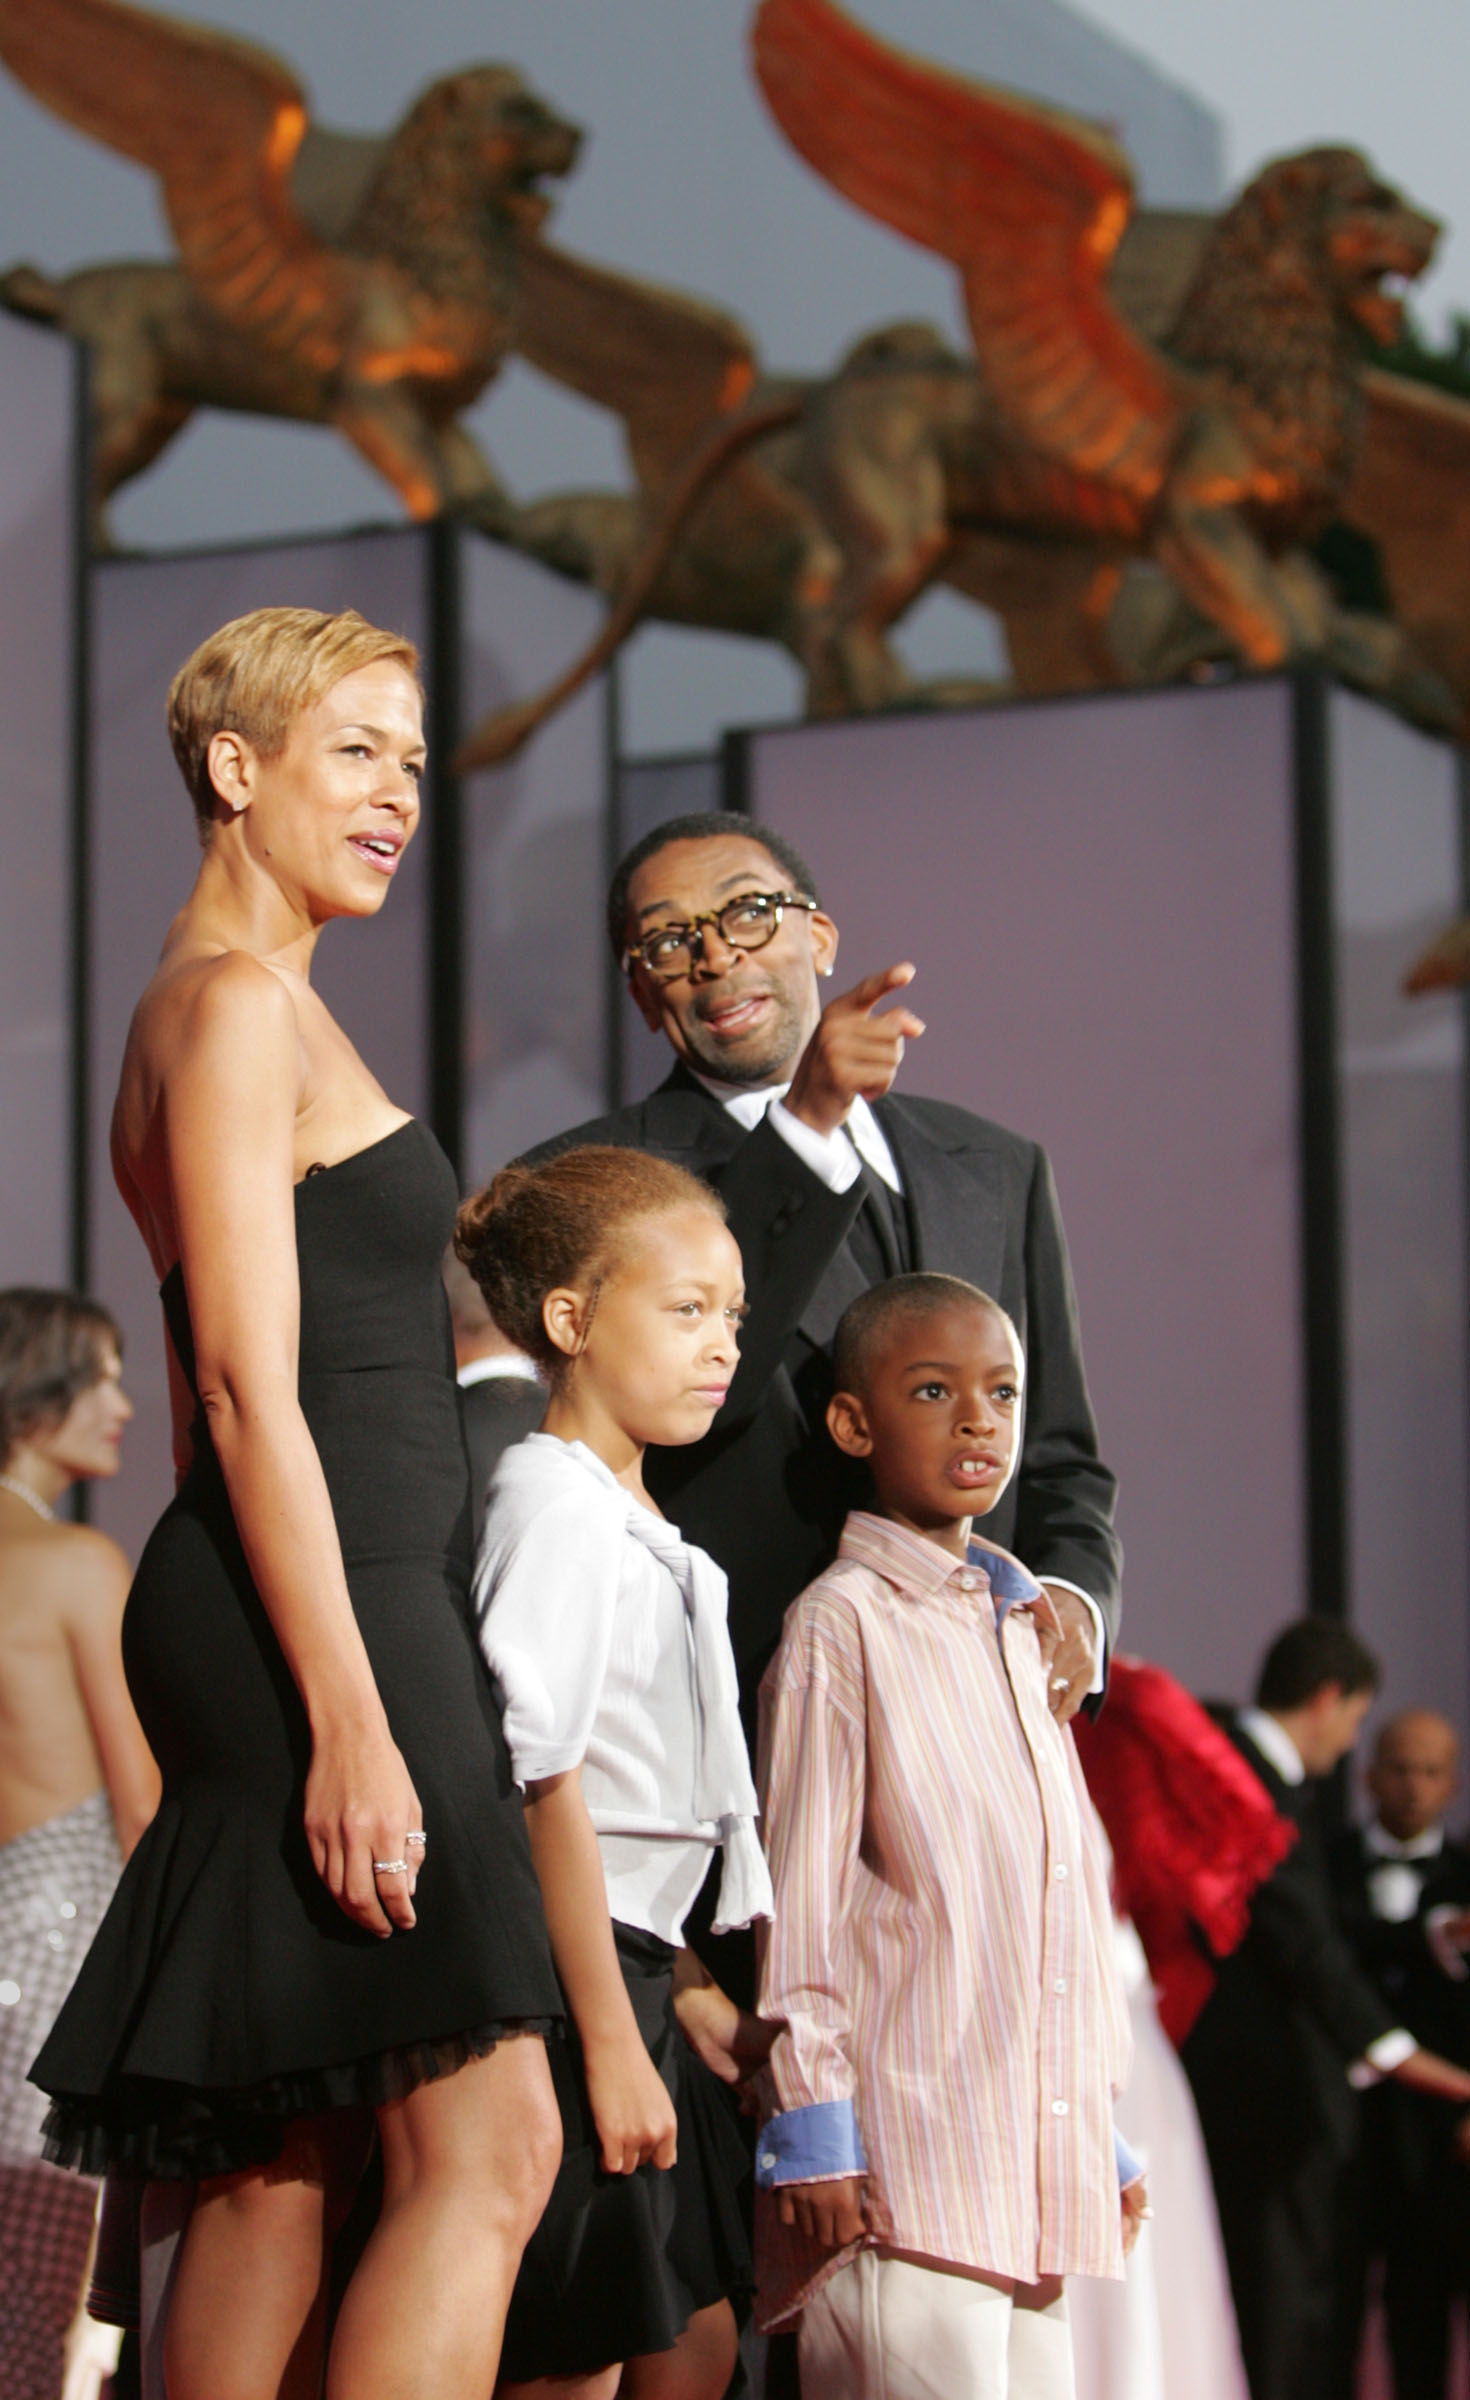 <p>Director Spike Lee and his wife, lawyer Tonya Lewis Lee, brought their kids -- daughter Satchel, who was nearly 10 at the time, and son Jackson, who turned 7 that year, to the opening ceremony of the 61st Venice Film Festival in Italy in September 2004. Spike was a jury member at the annual celebration of movies that year. Keep reading to see the siblings all grown up...</p>